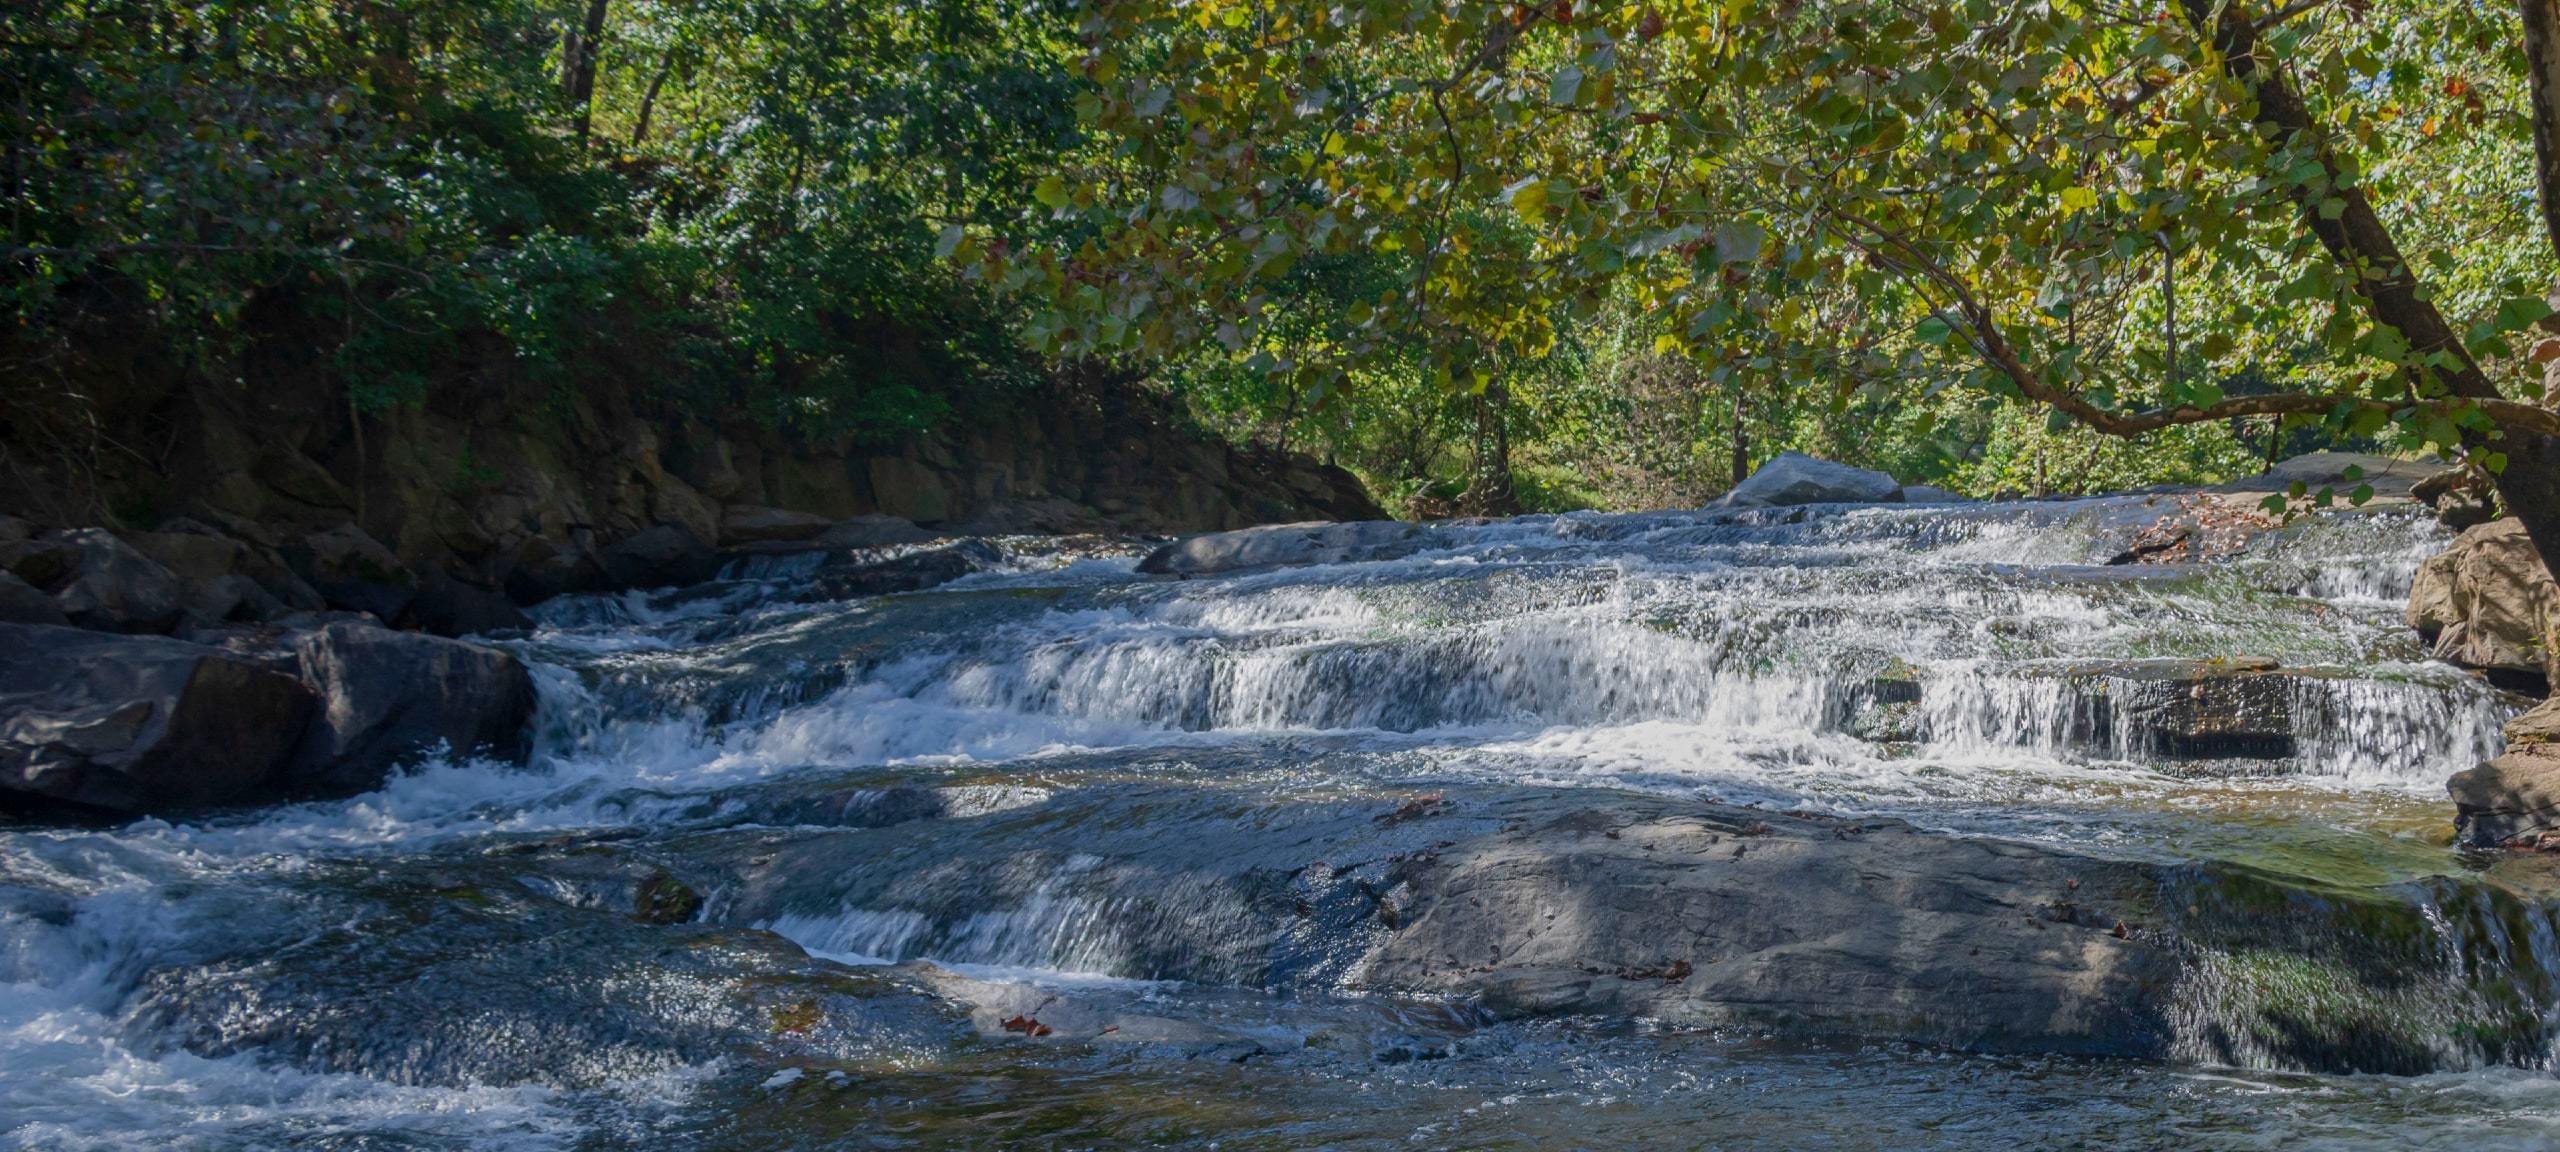 Rapids at Patapsco Valley State Park in Woodstock, Maryland